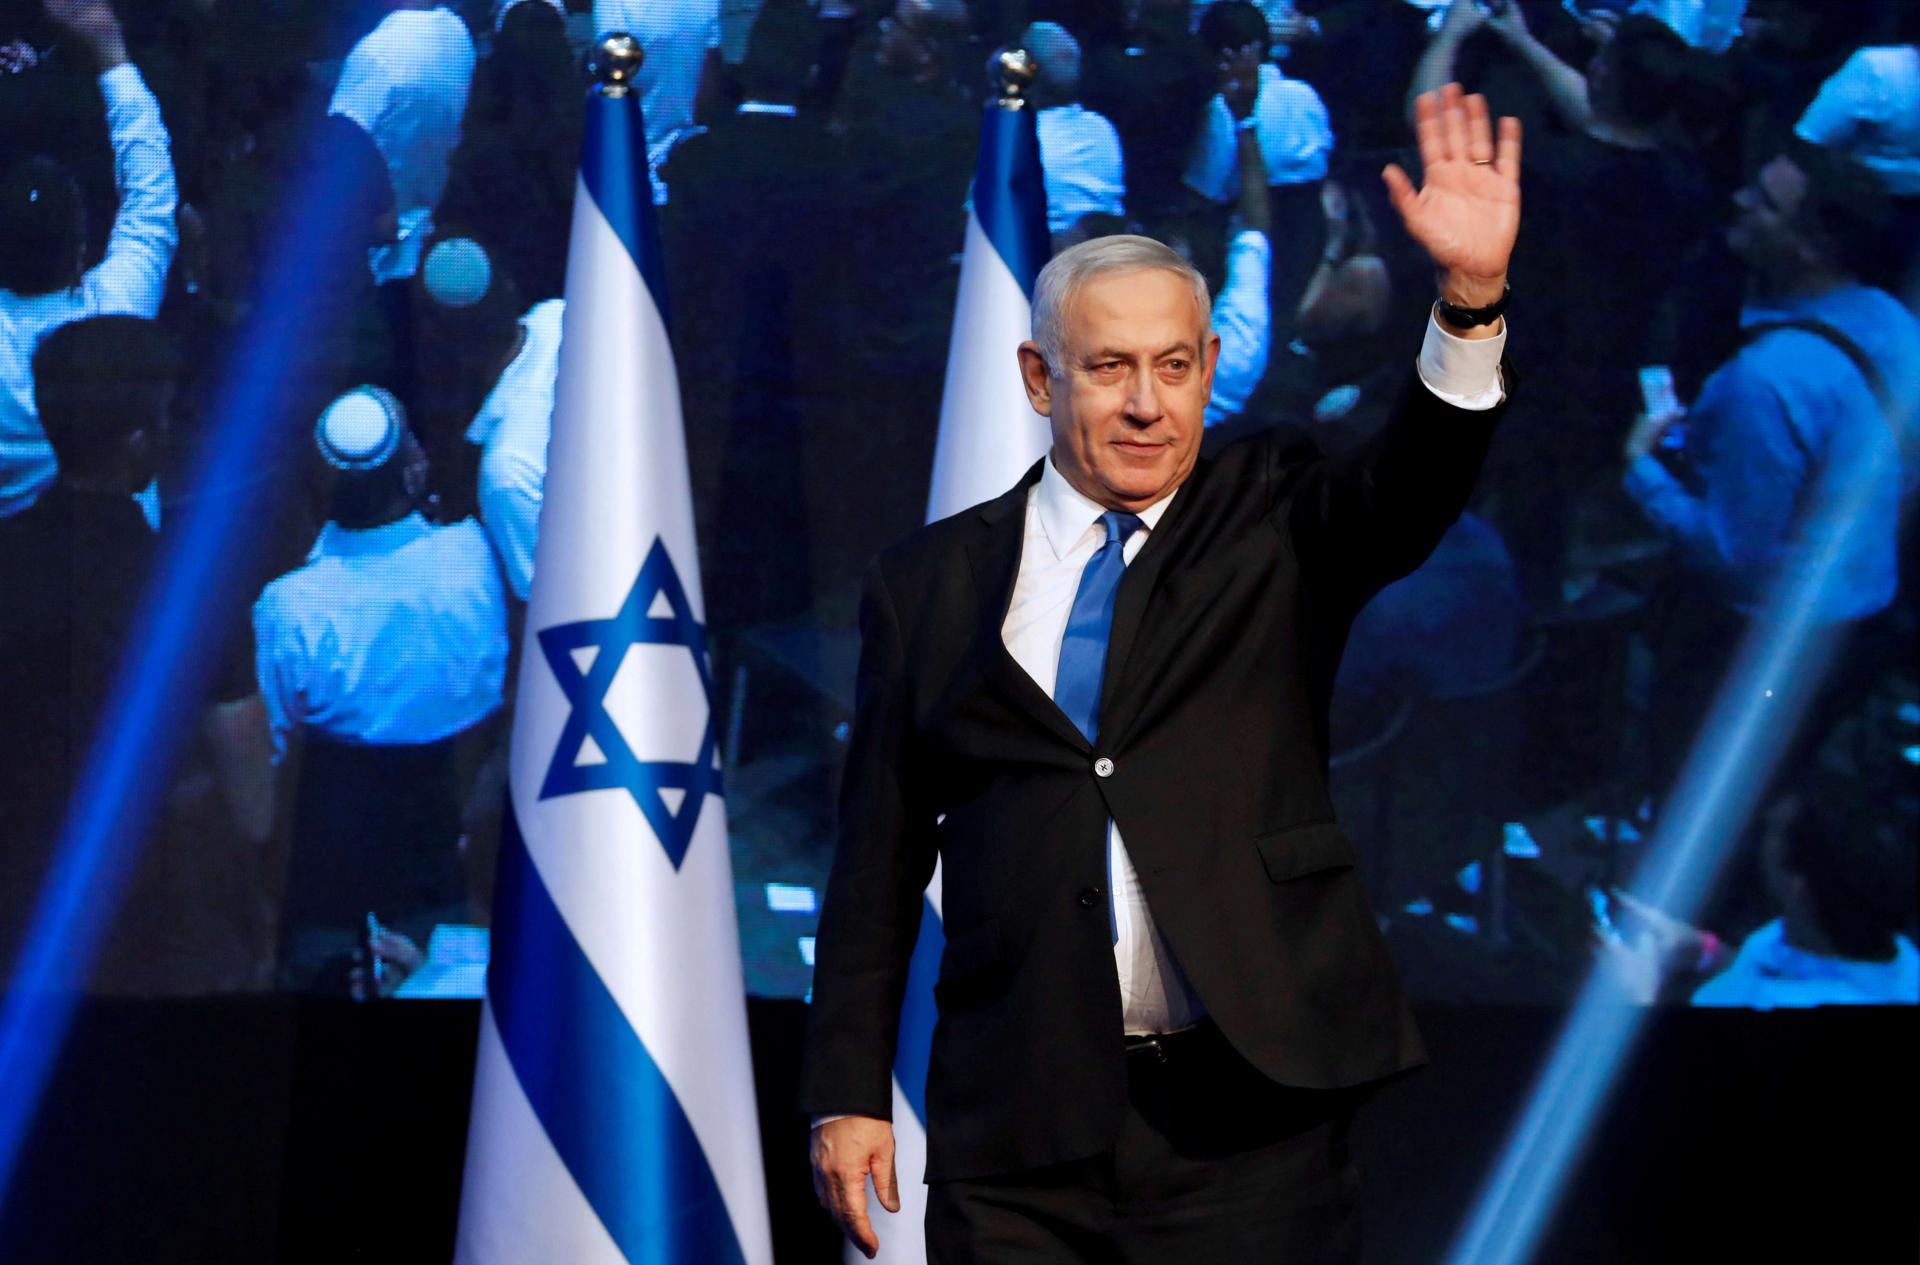 Netanyahu has received the endorsement of 55 parliament members to be prime minister, while Gantz has received 54.